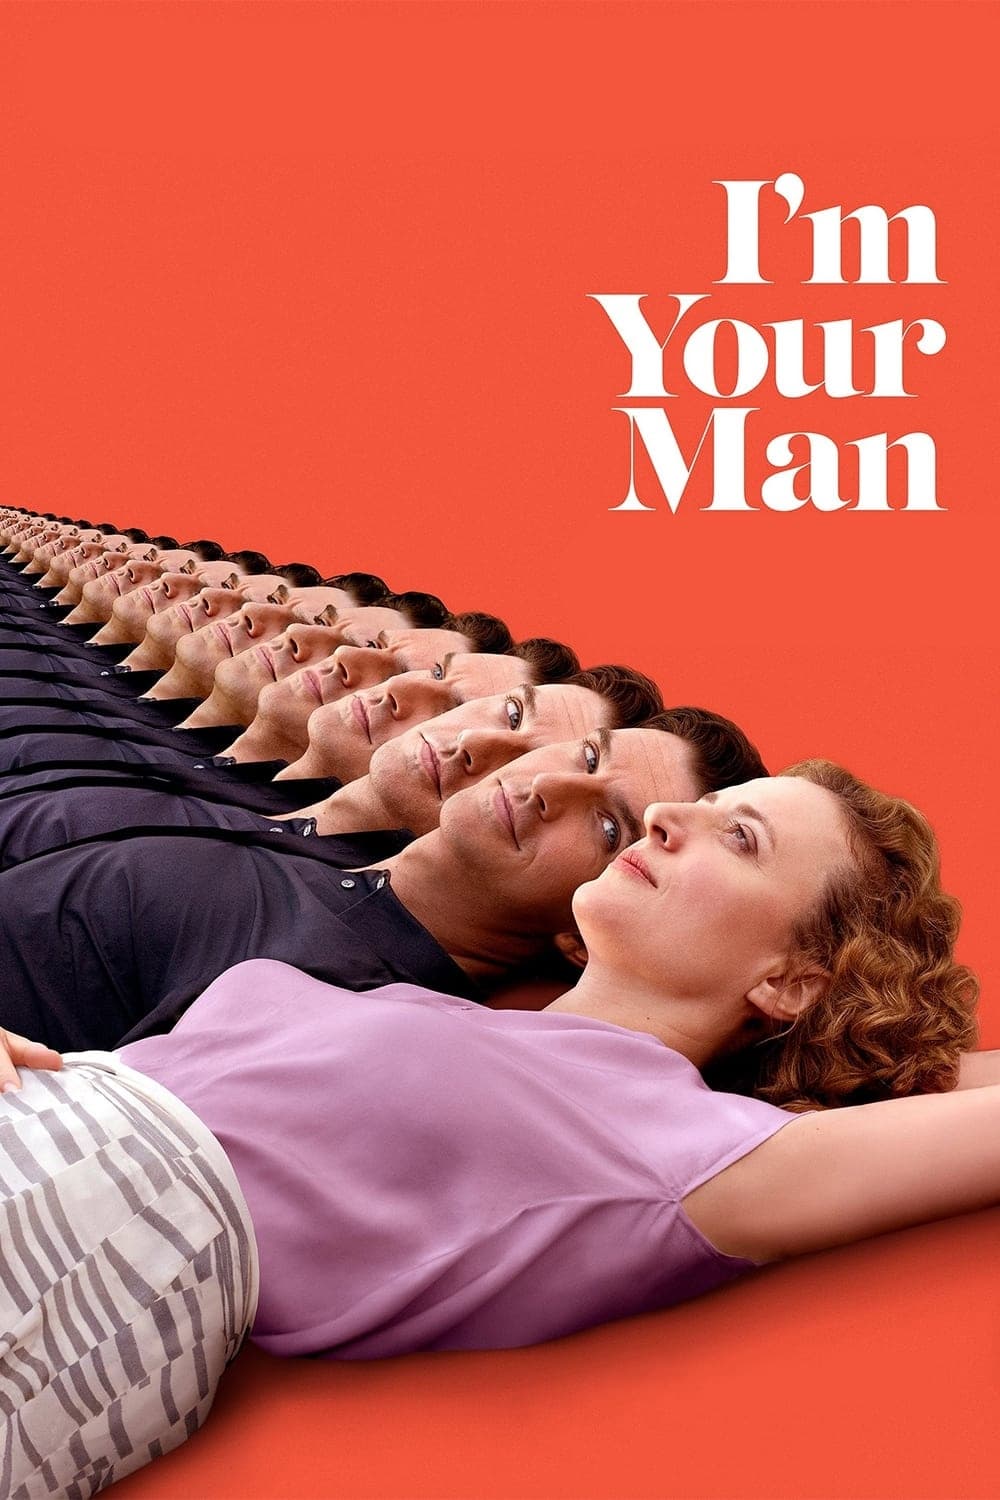 I'm Your Man Movie Poster